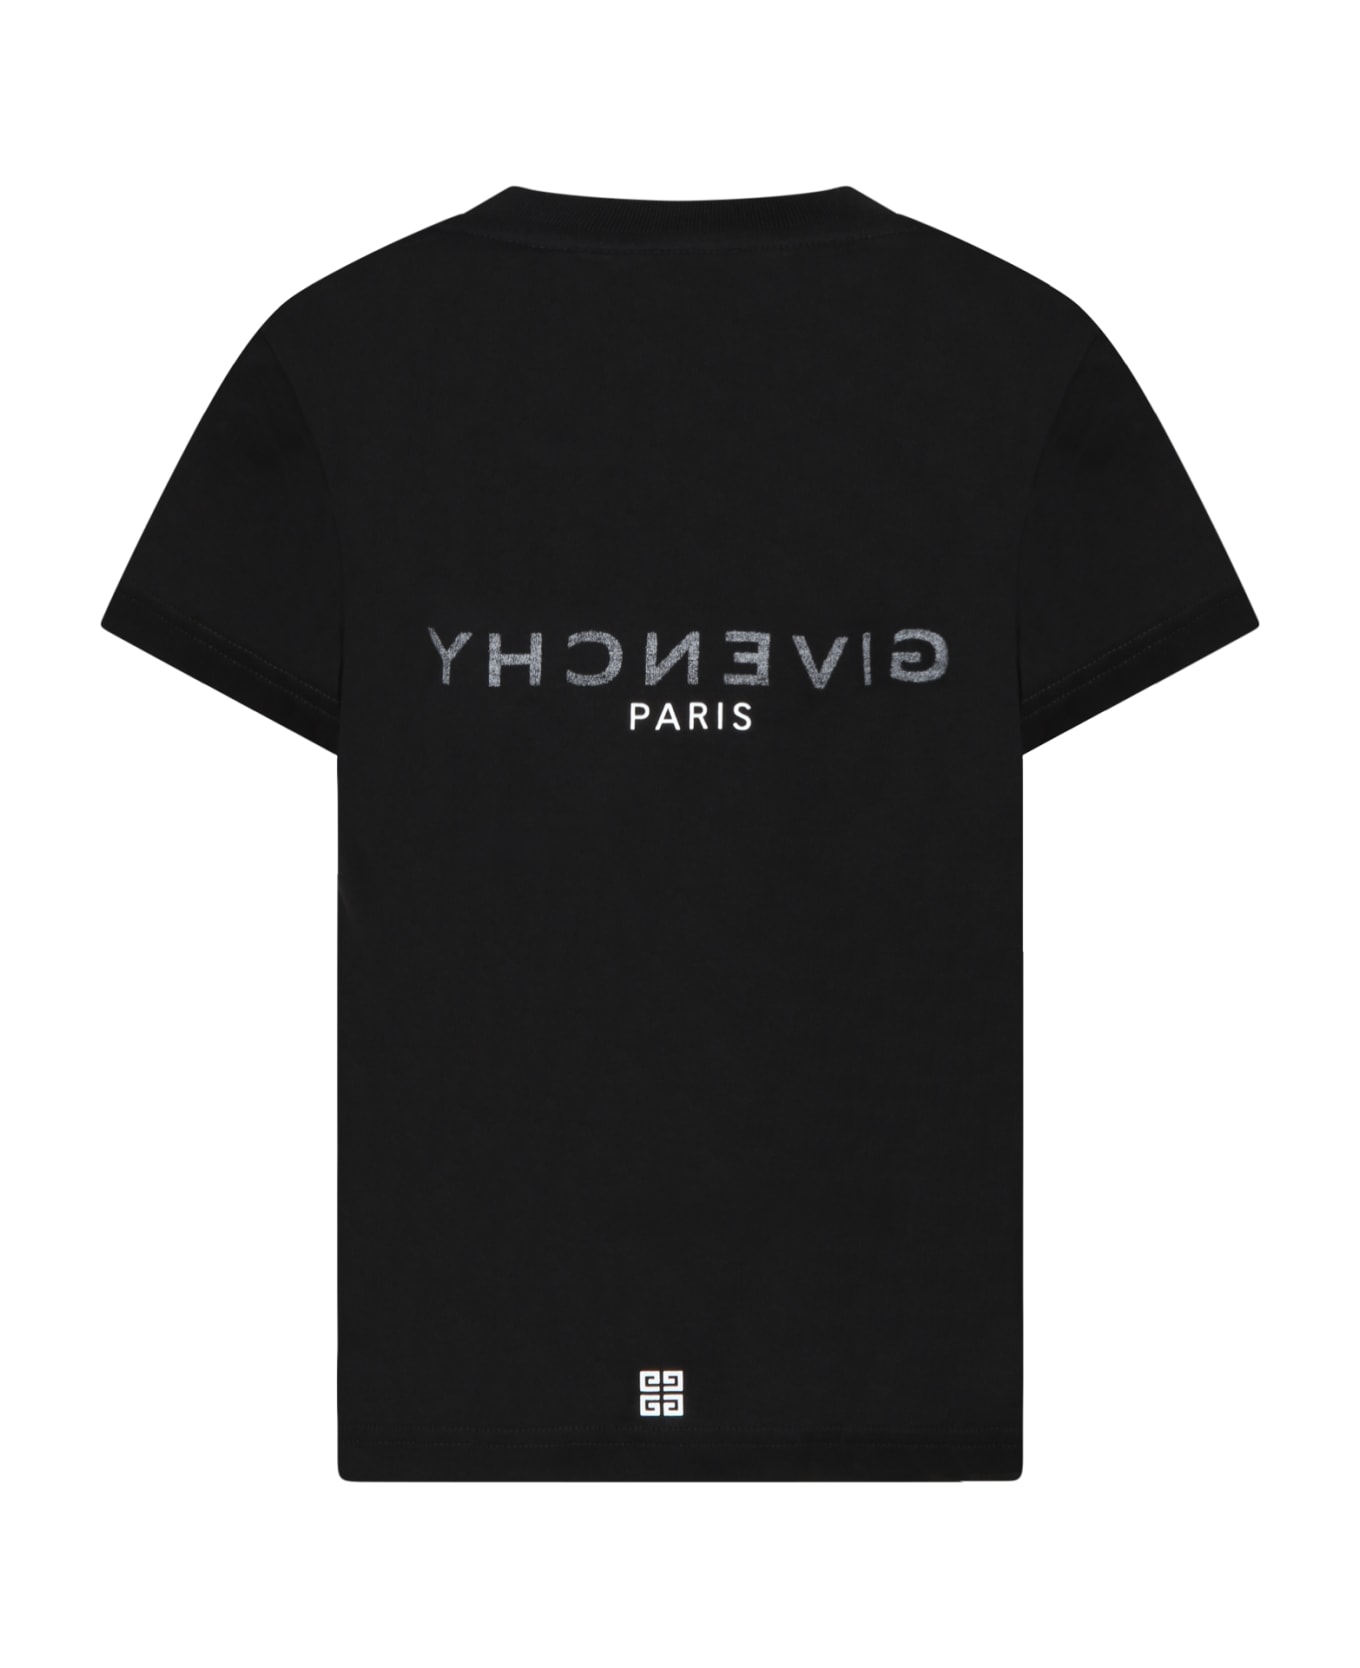 Givenchy Black T-shirt For Kids With White And Gray Logo - Black